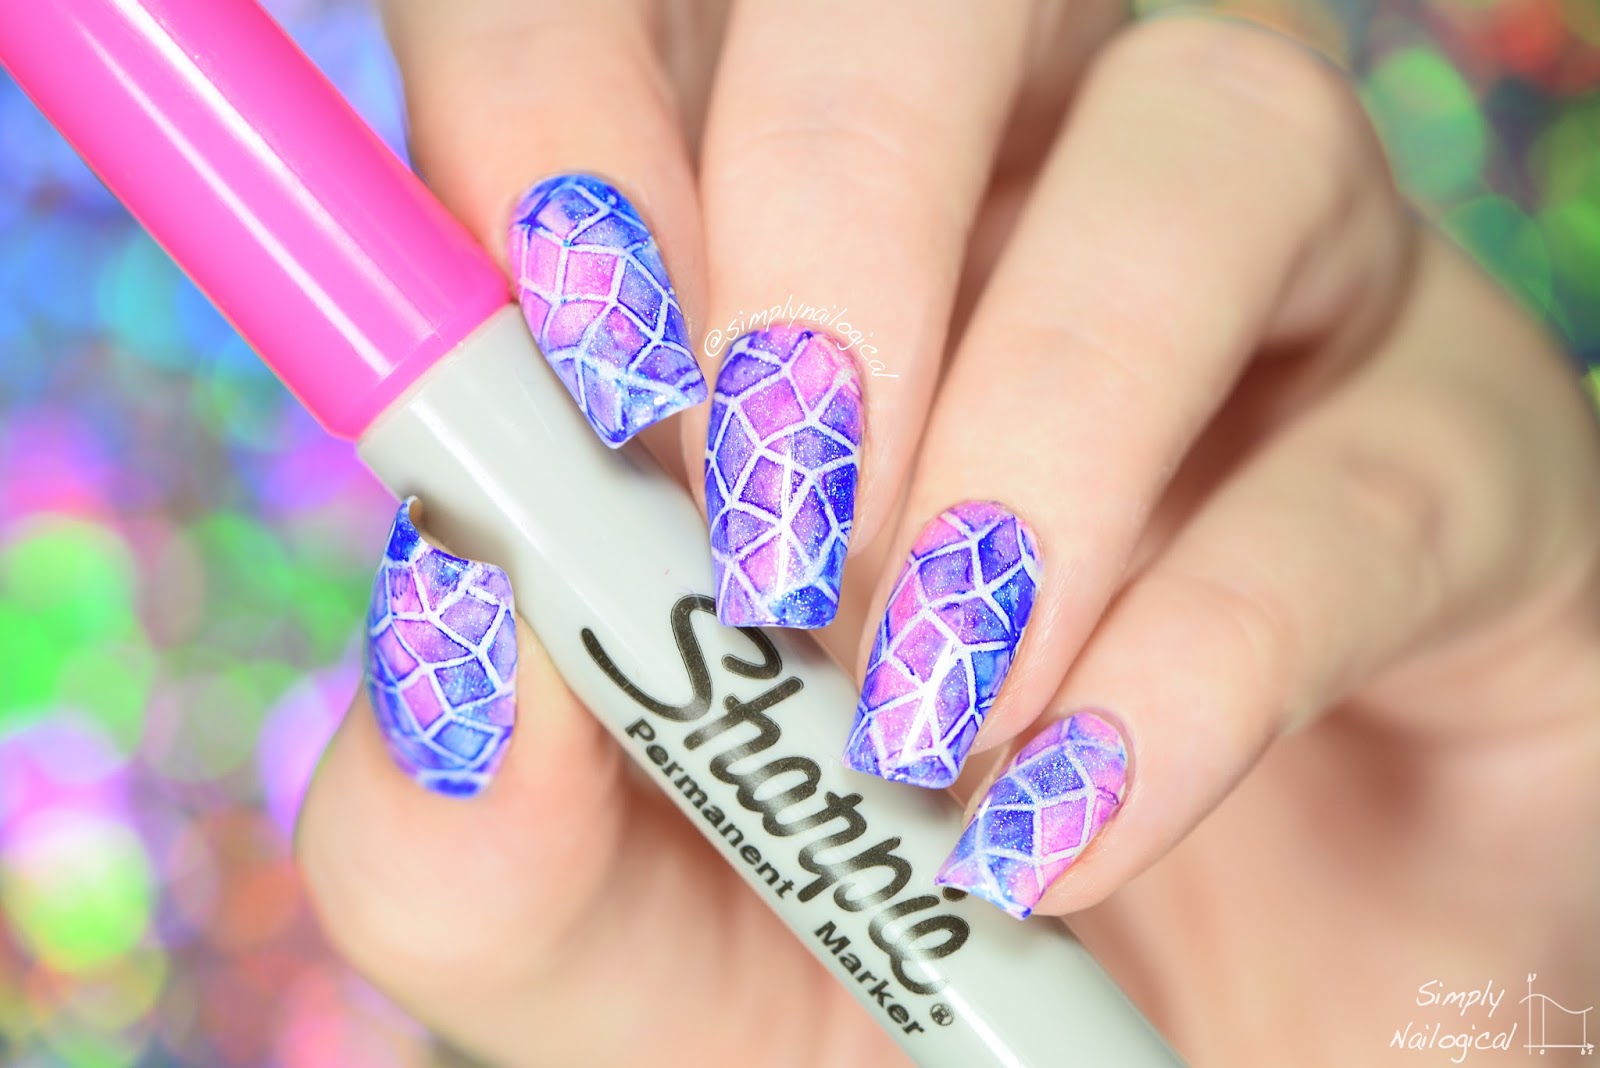 Simply Nailogical: Sharpie Watercolour Nail Art With Vinyl Patterns